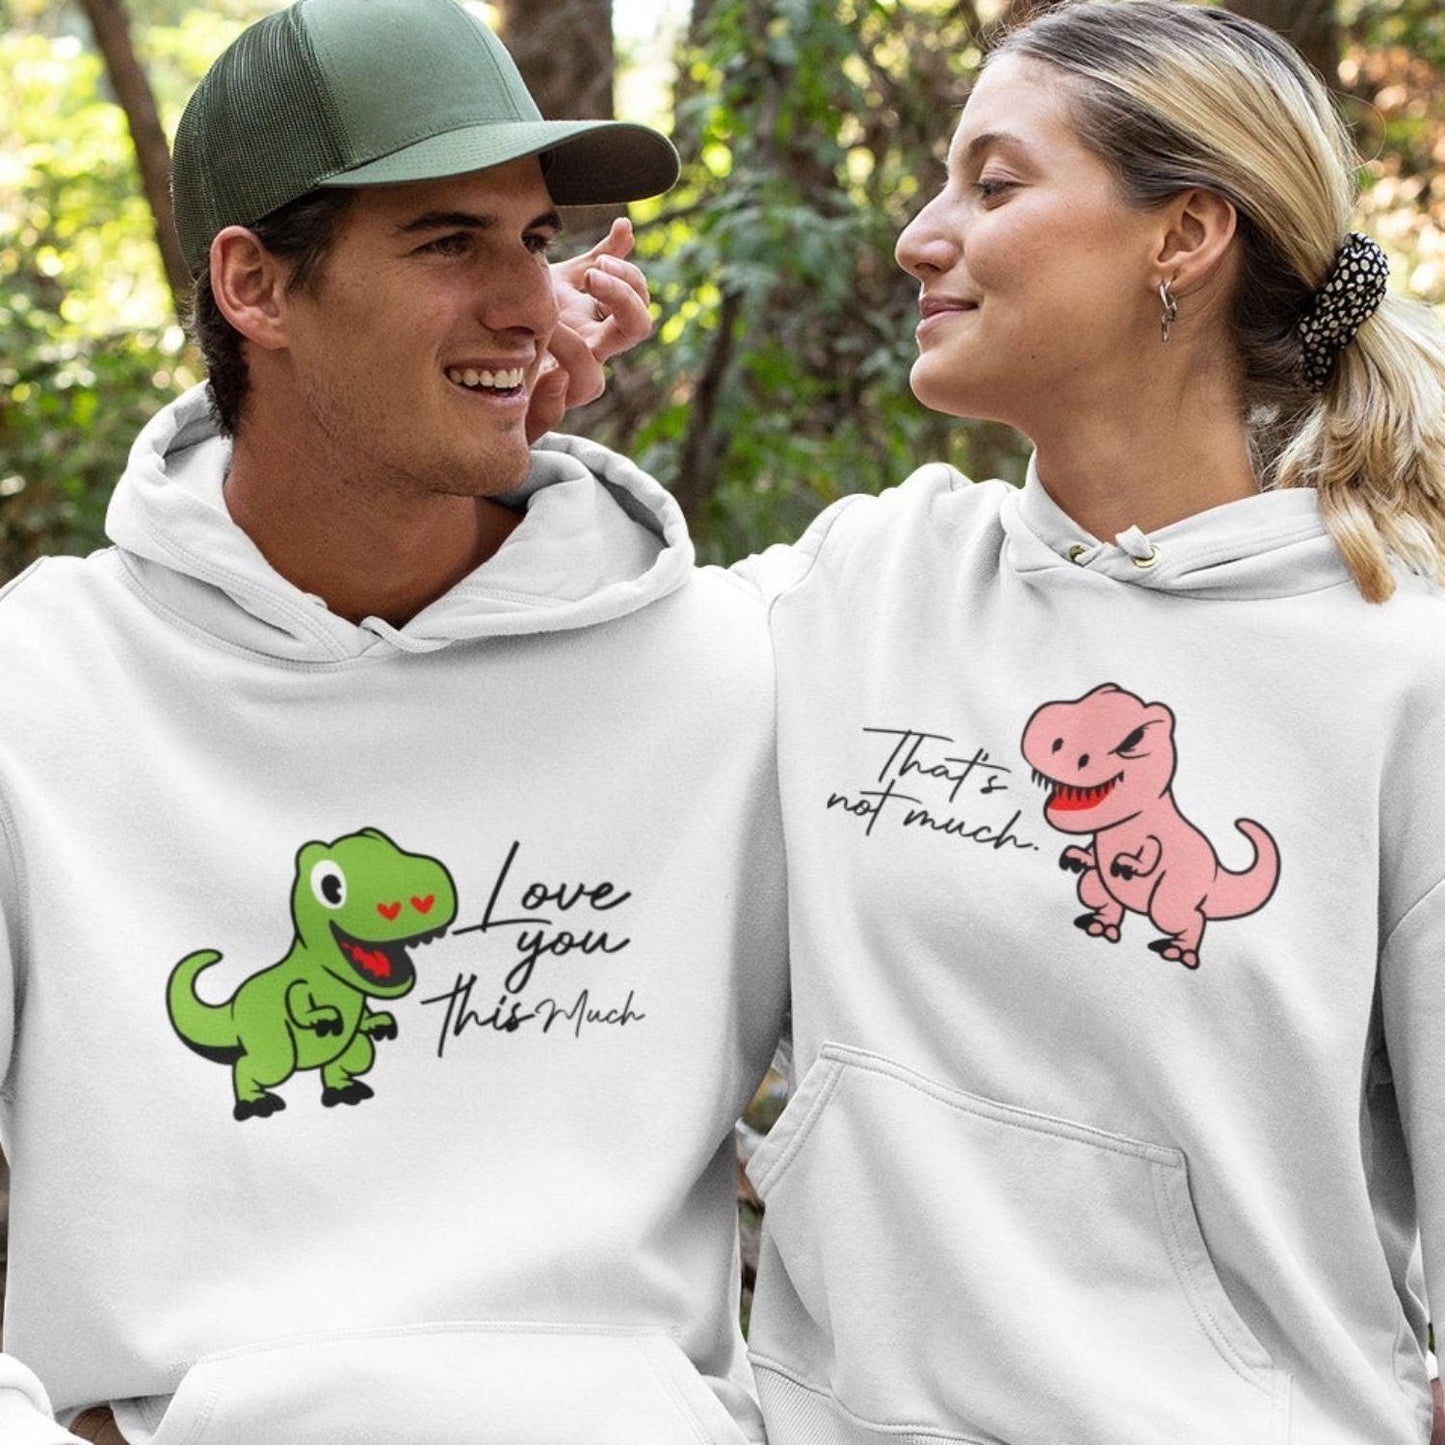 I Love You This Much/That's Not Much! Funny T-Rex Couple Matching Outfits - 4Lovebirds